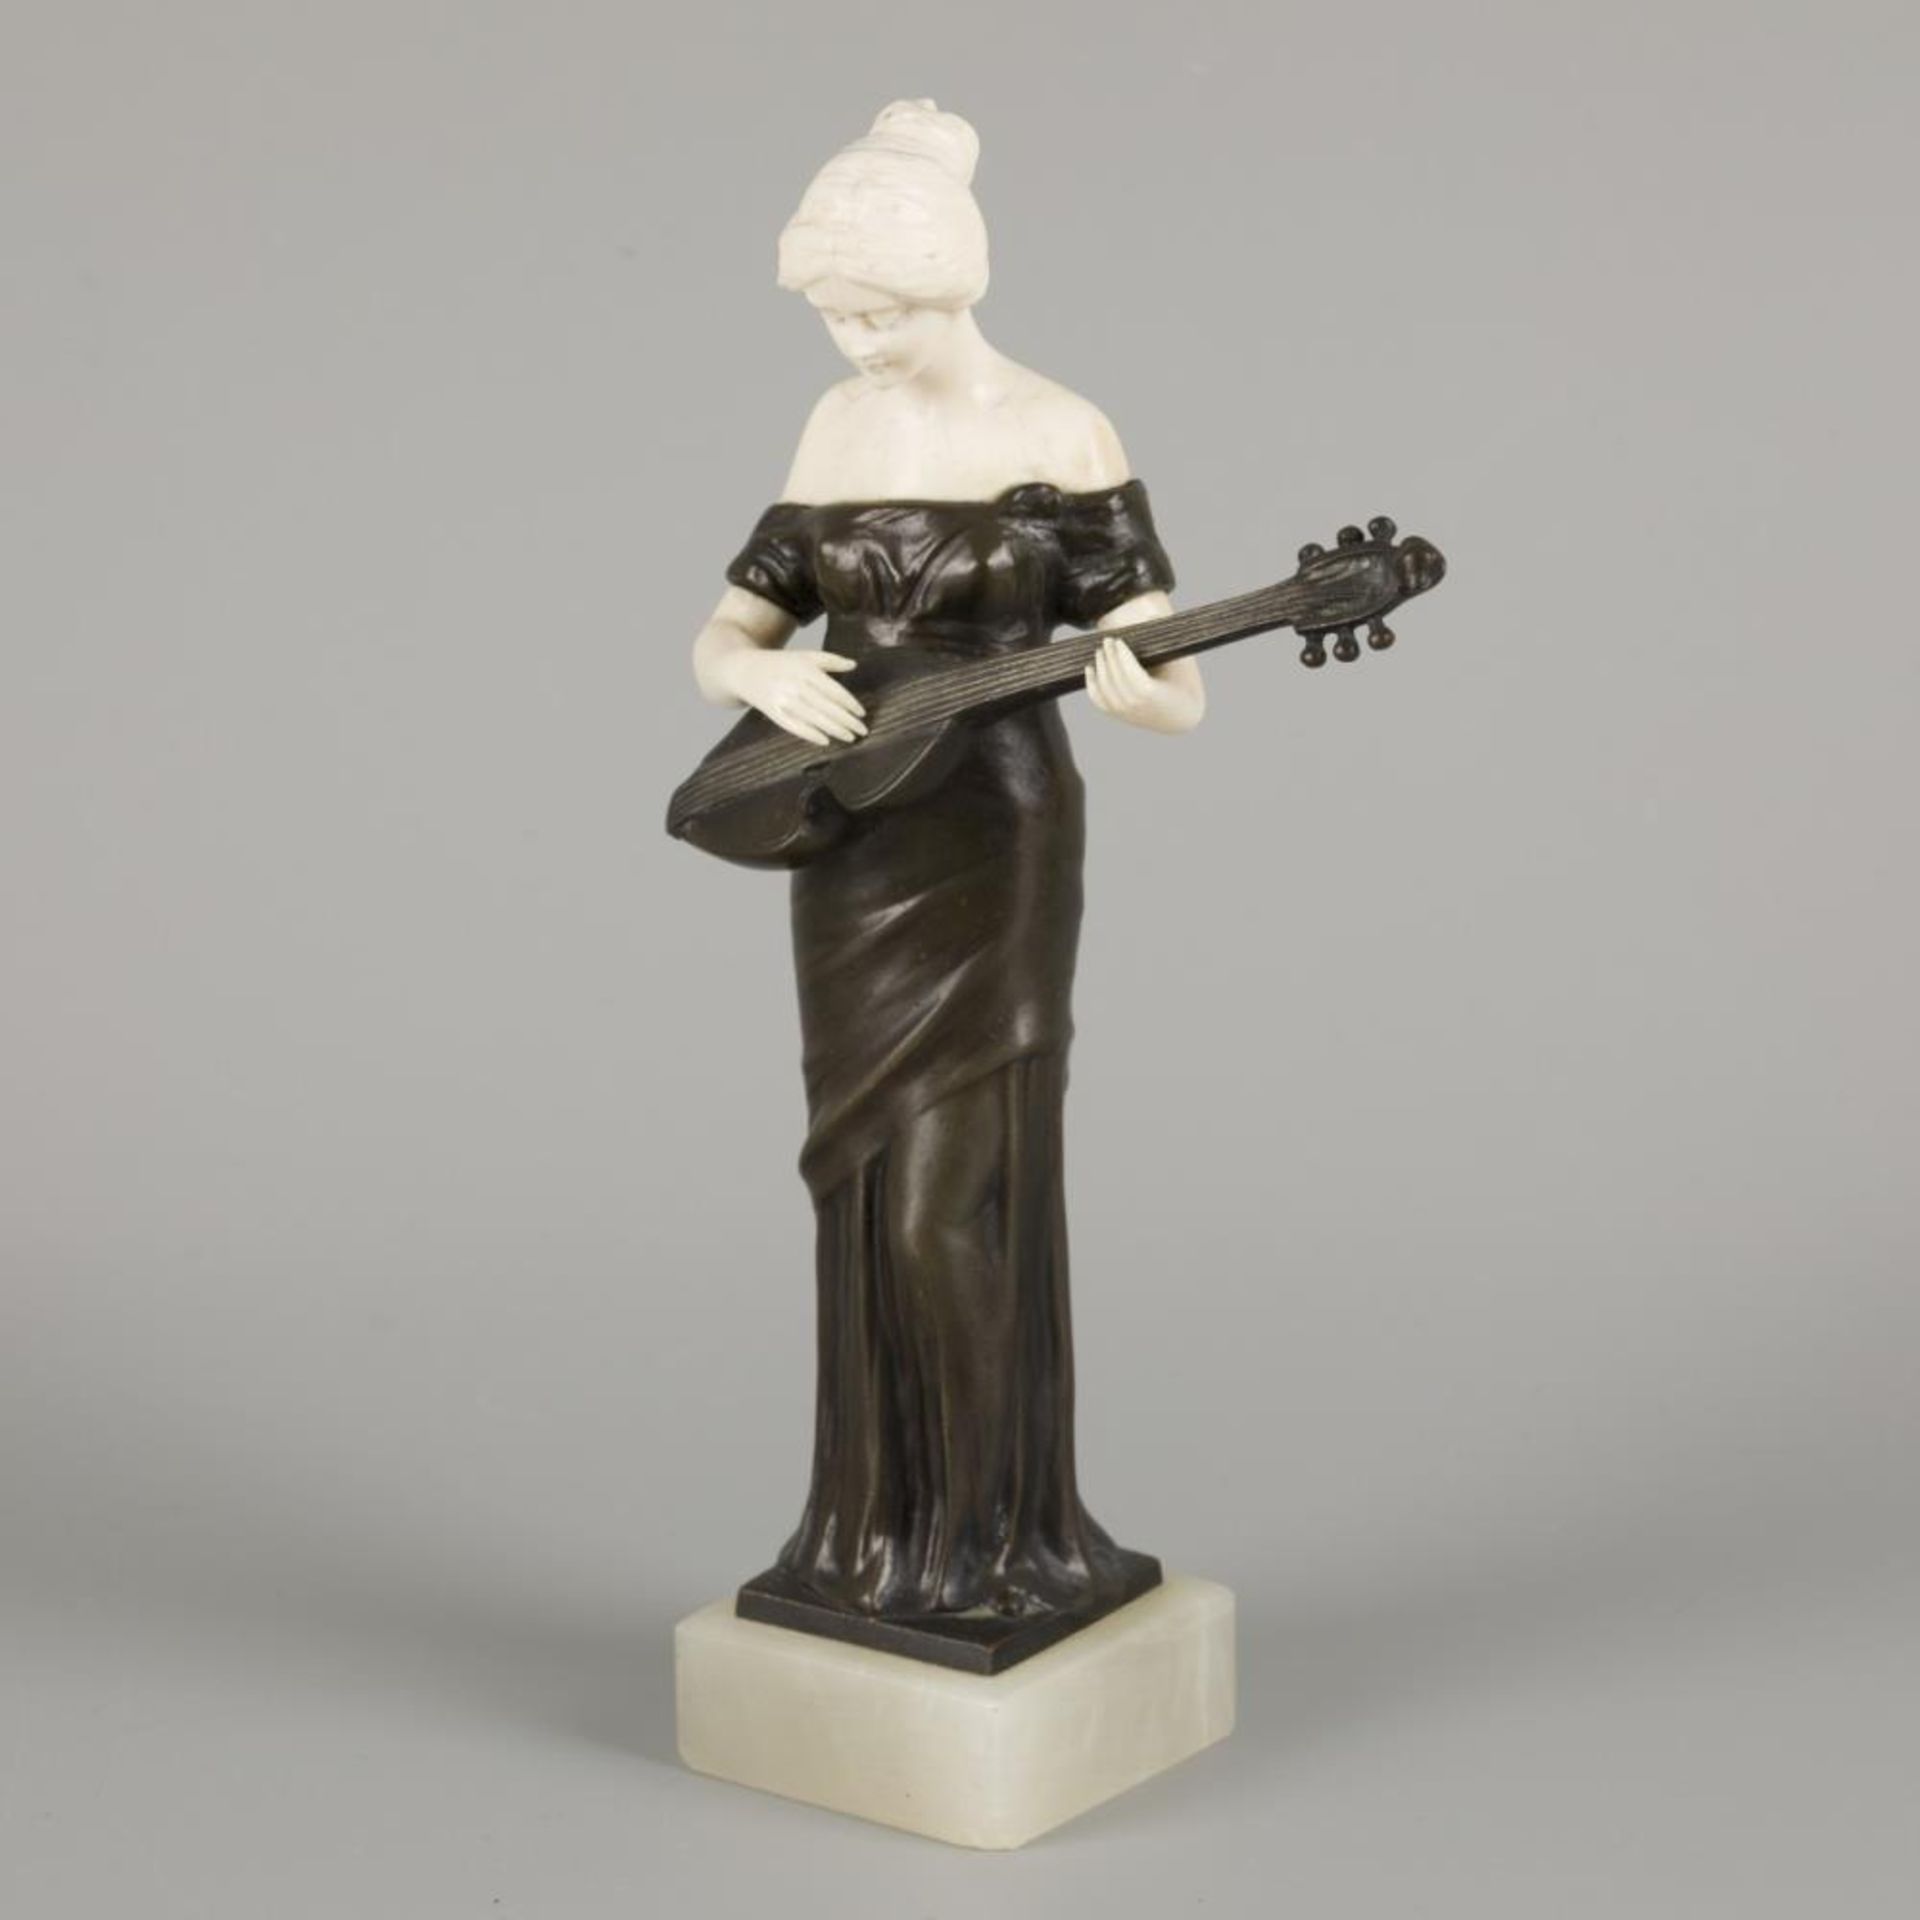 Ferdinand Lugerth (1885 - 1915), a bronze statuette of a guitar playing lady, Austria, ca. 1900. - Image 2 of 4